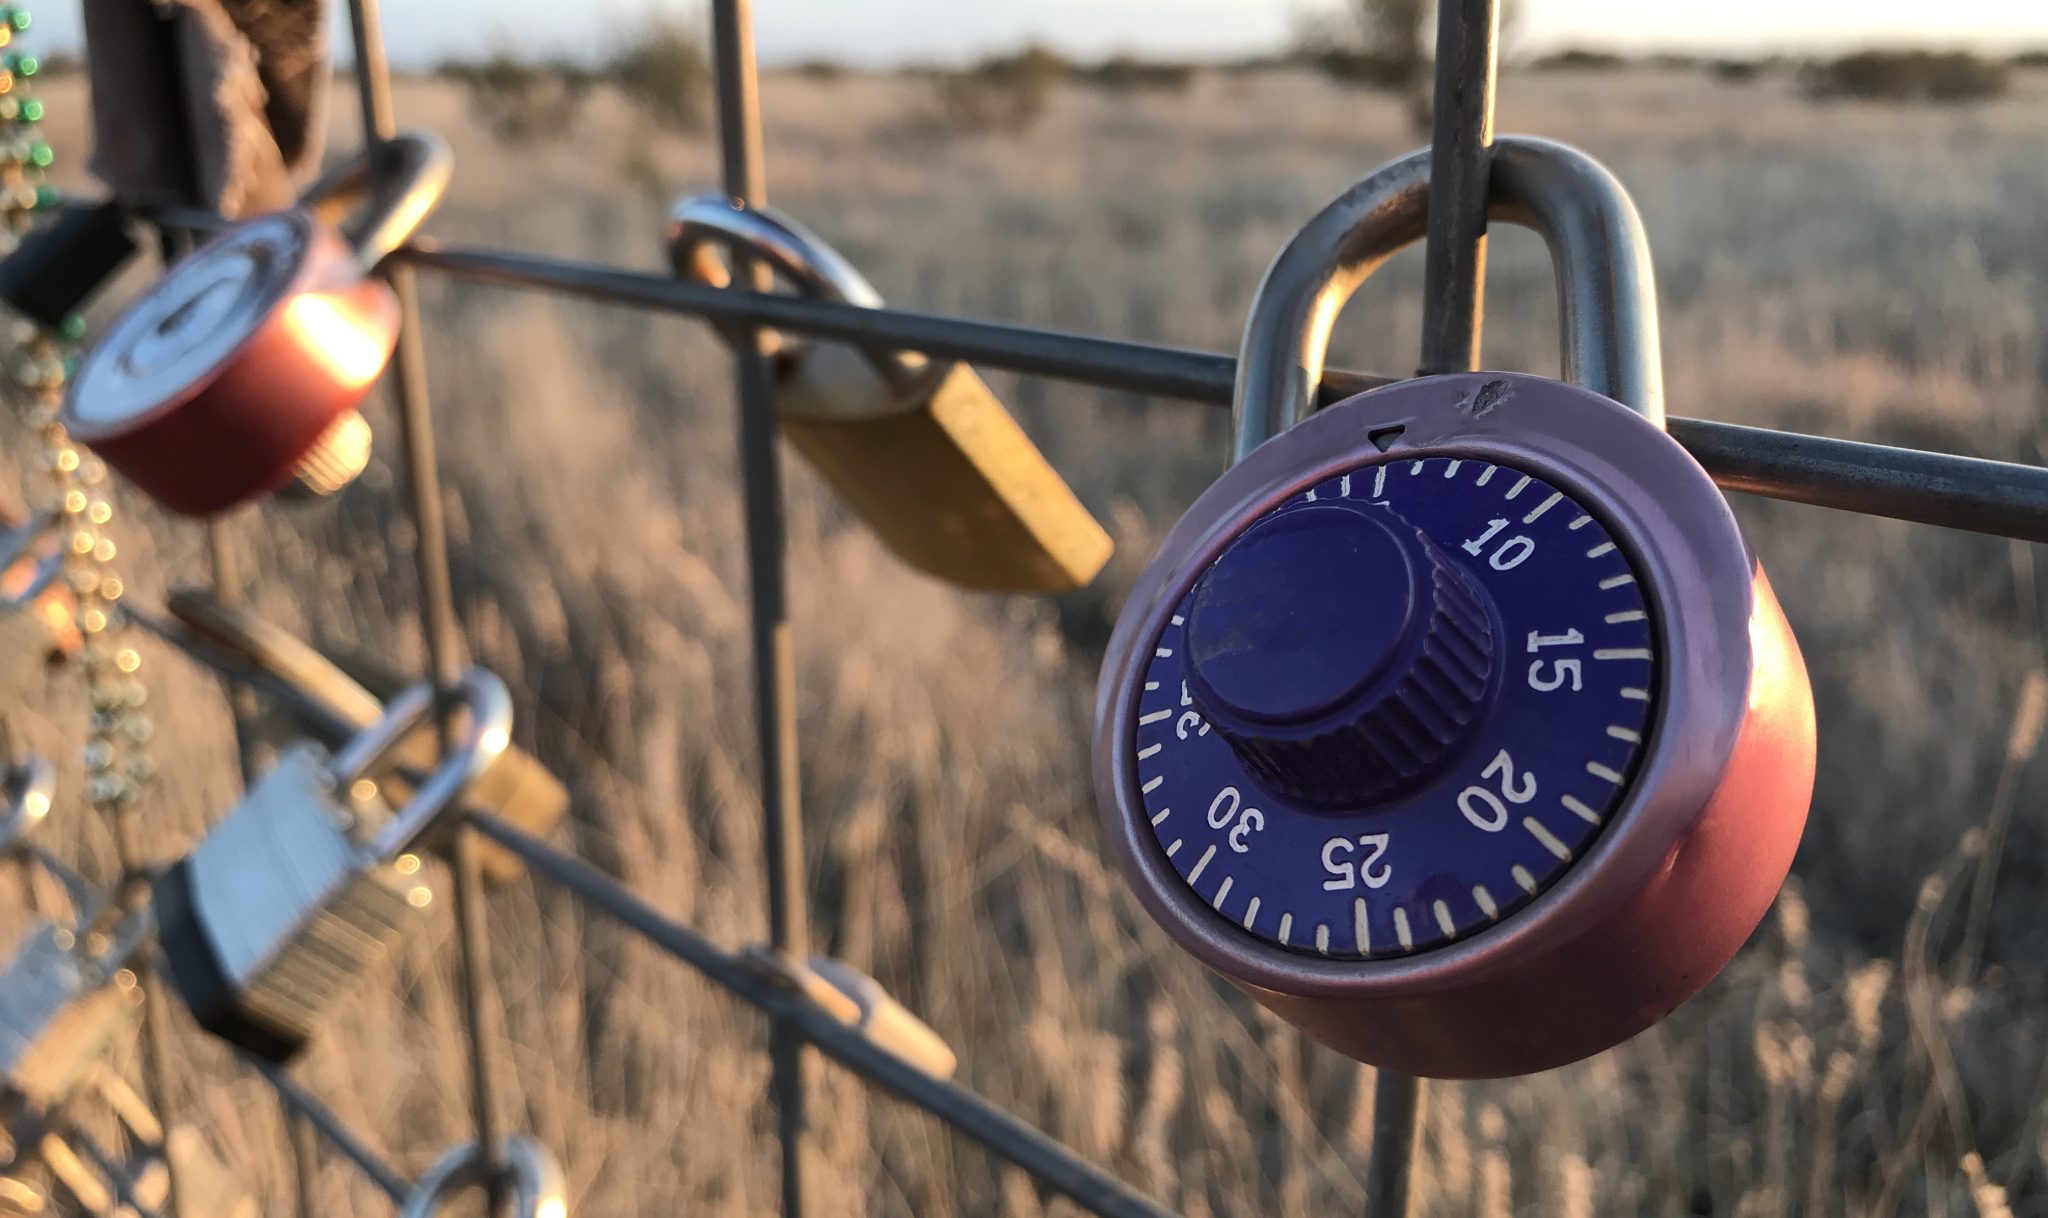 Security lock hanging on a metal fence in the desert